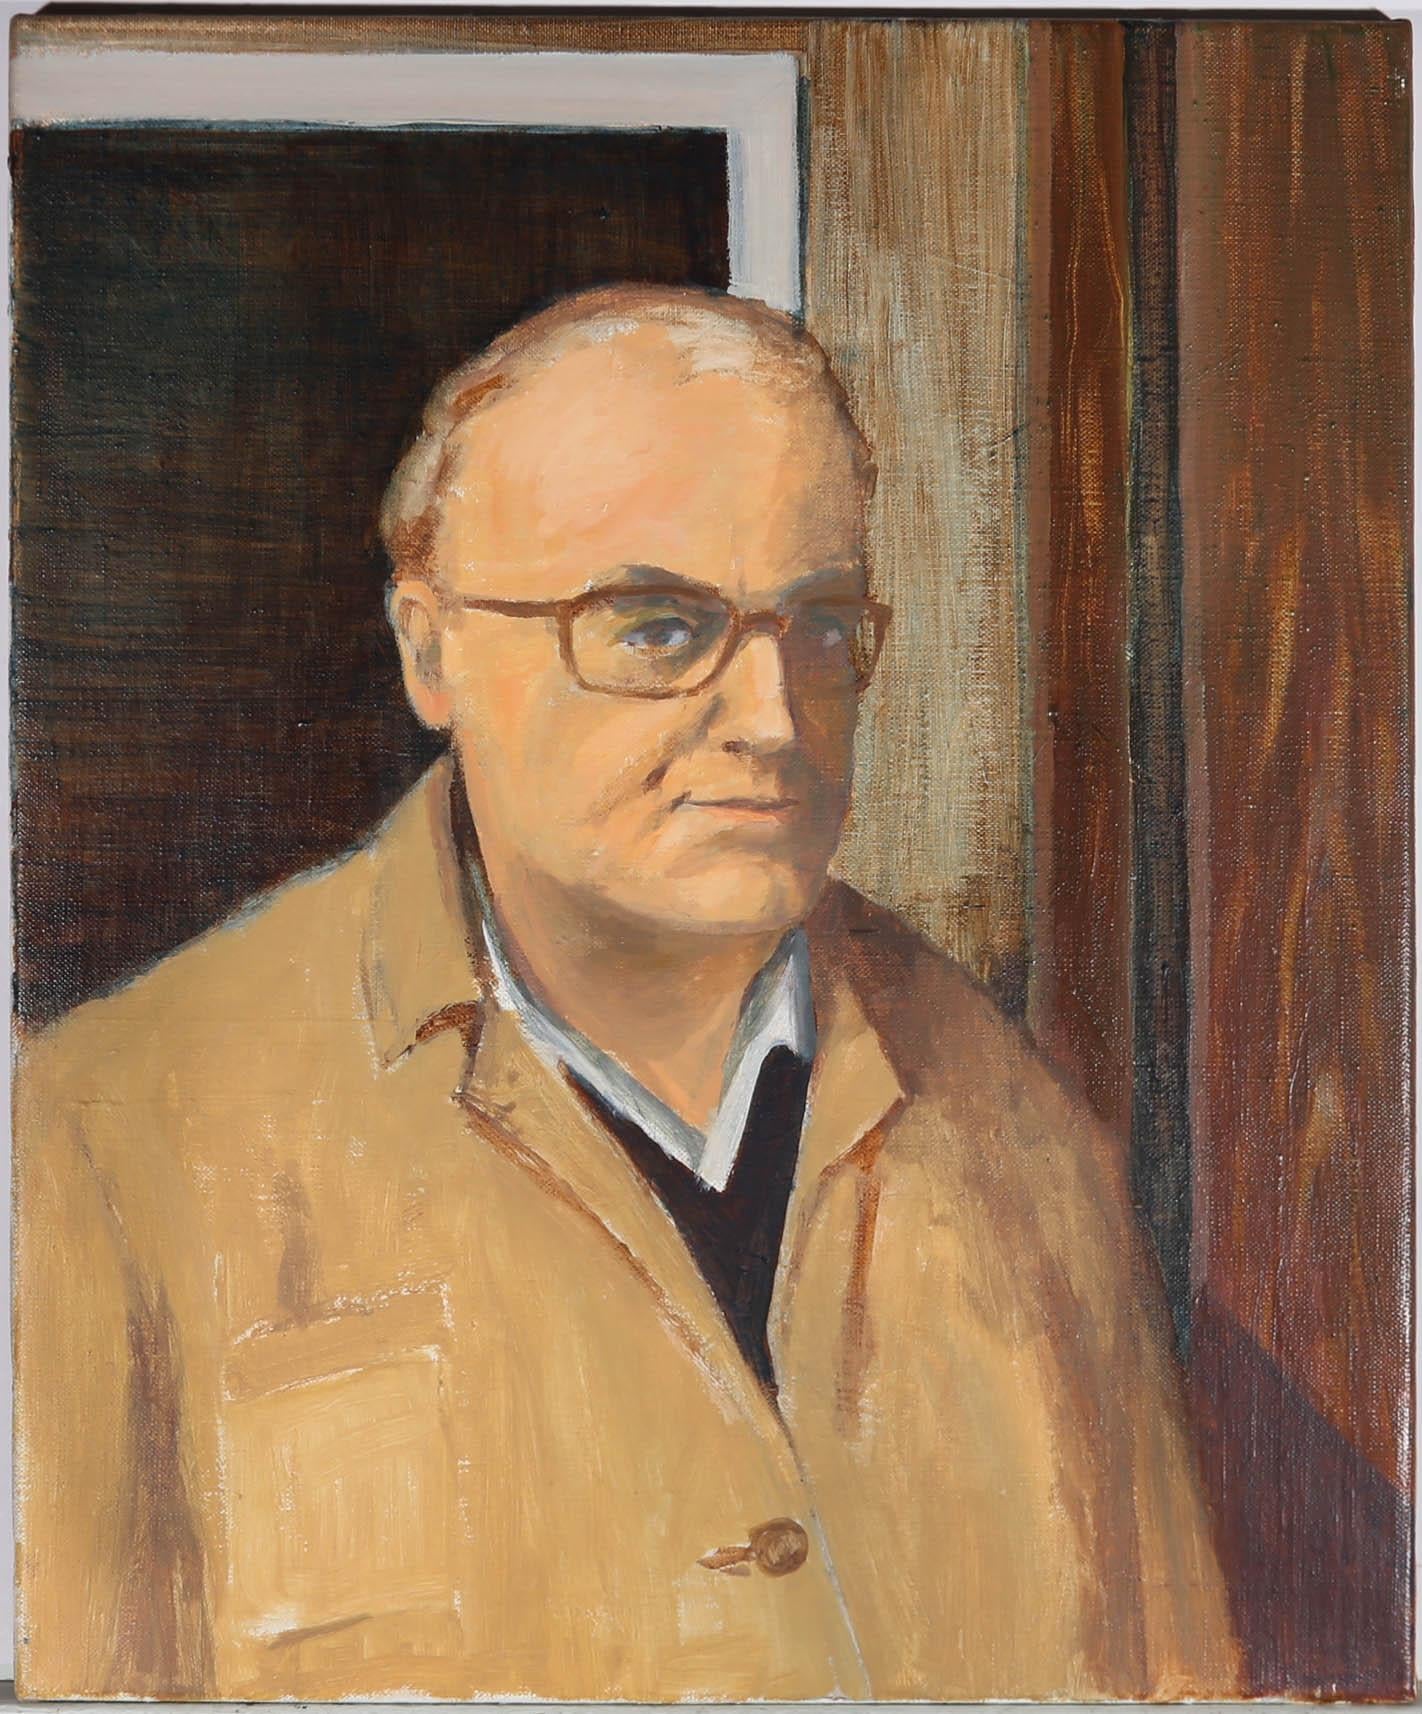 A charming depiction of the artist himself, dressed in a beige jacket and red glasses. Unsigned. On canvas.